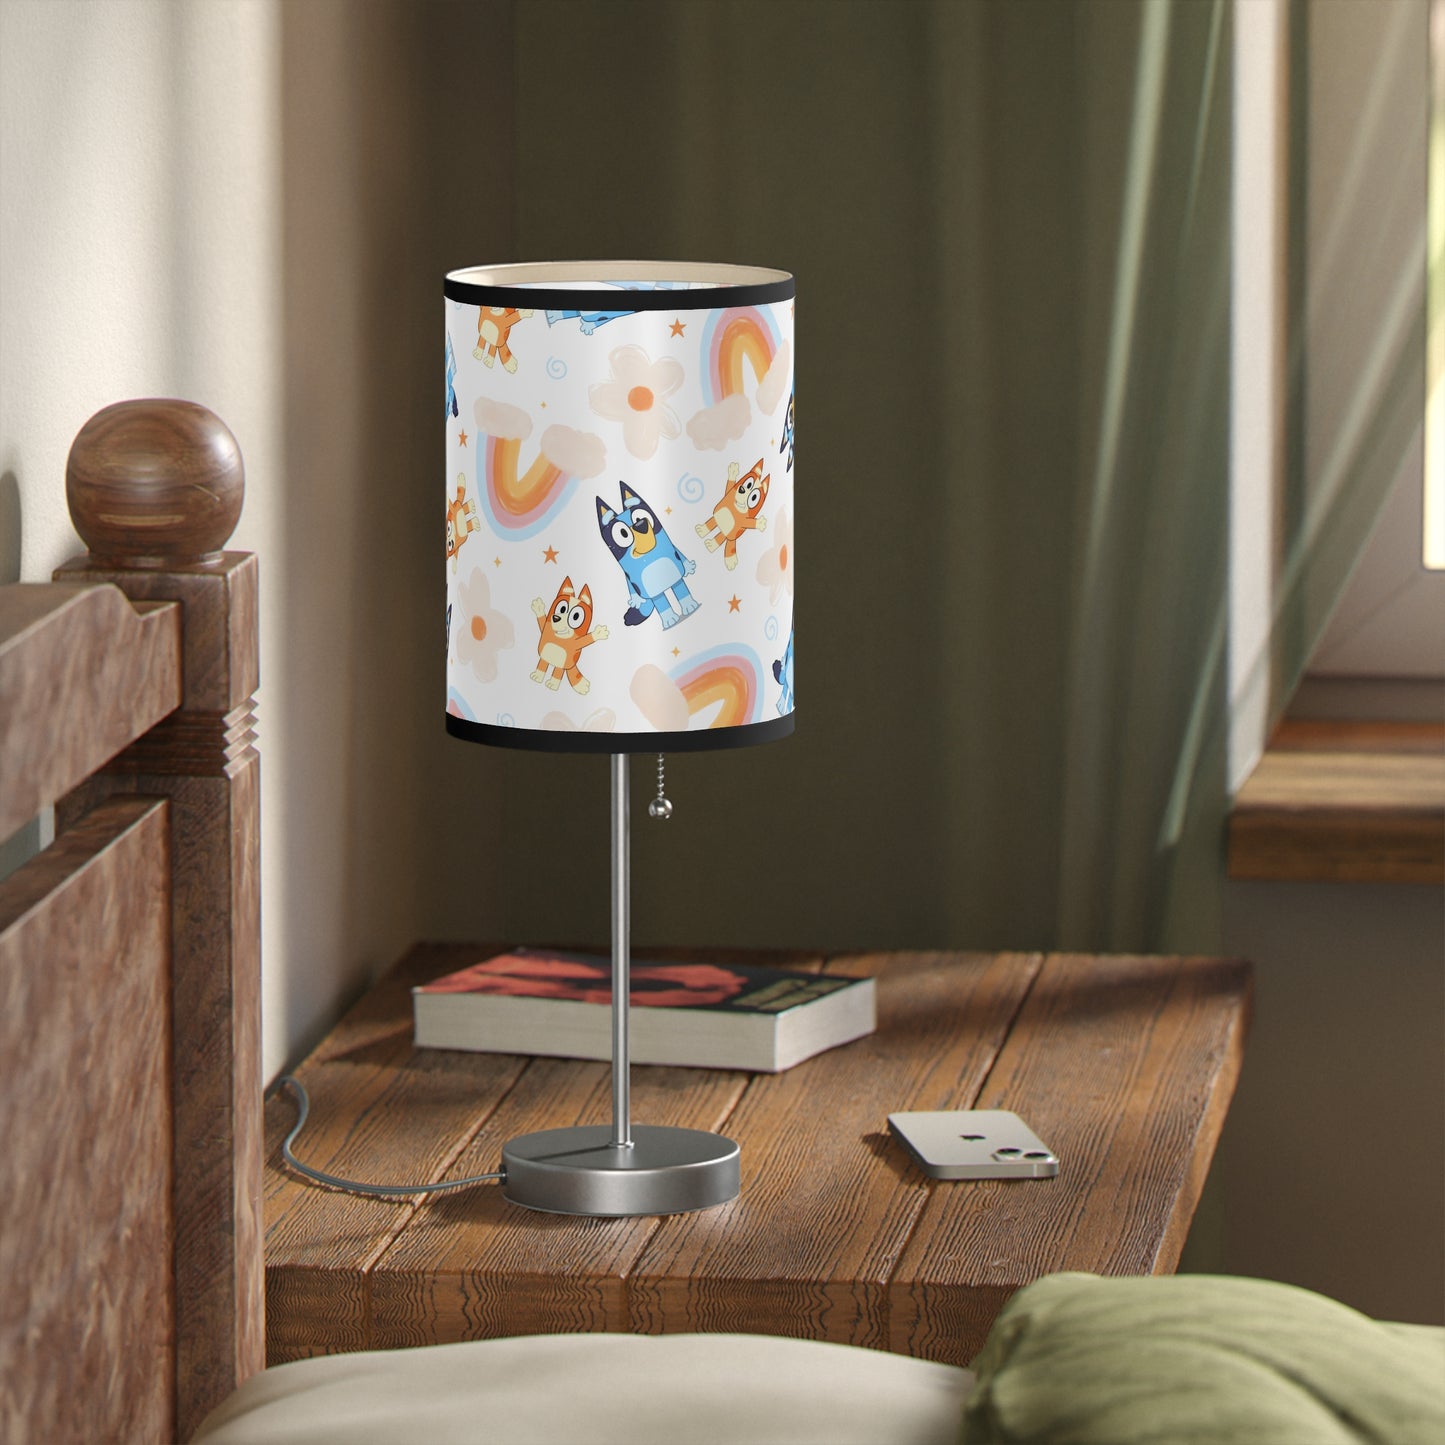 Bluey Rainbows & Flowers Pattern Lamp on a Stand